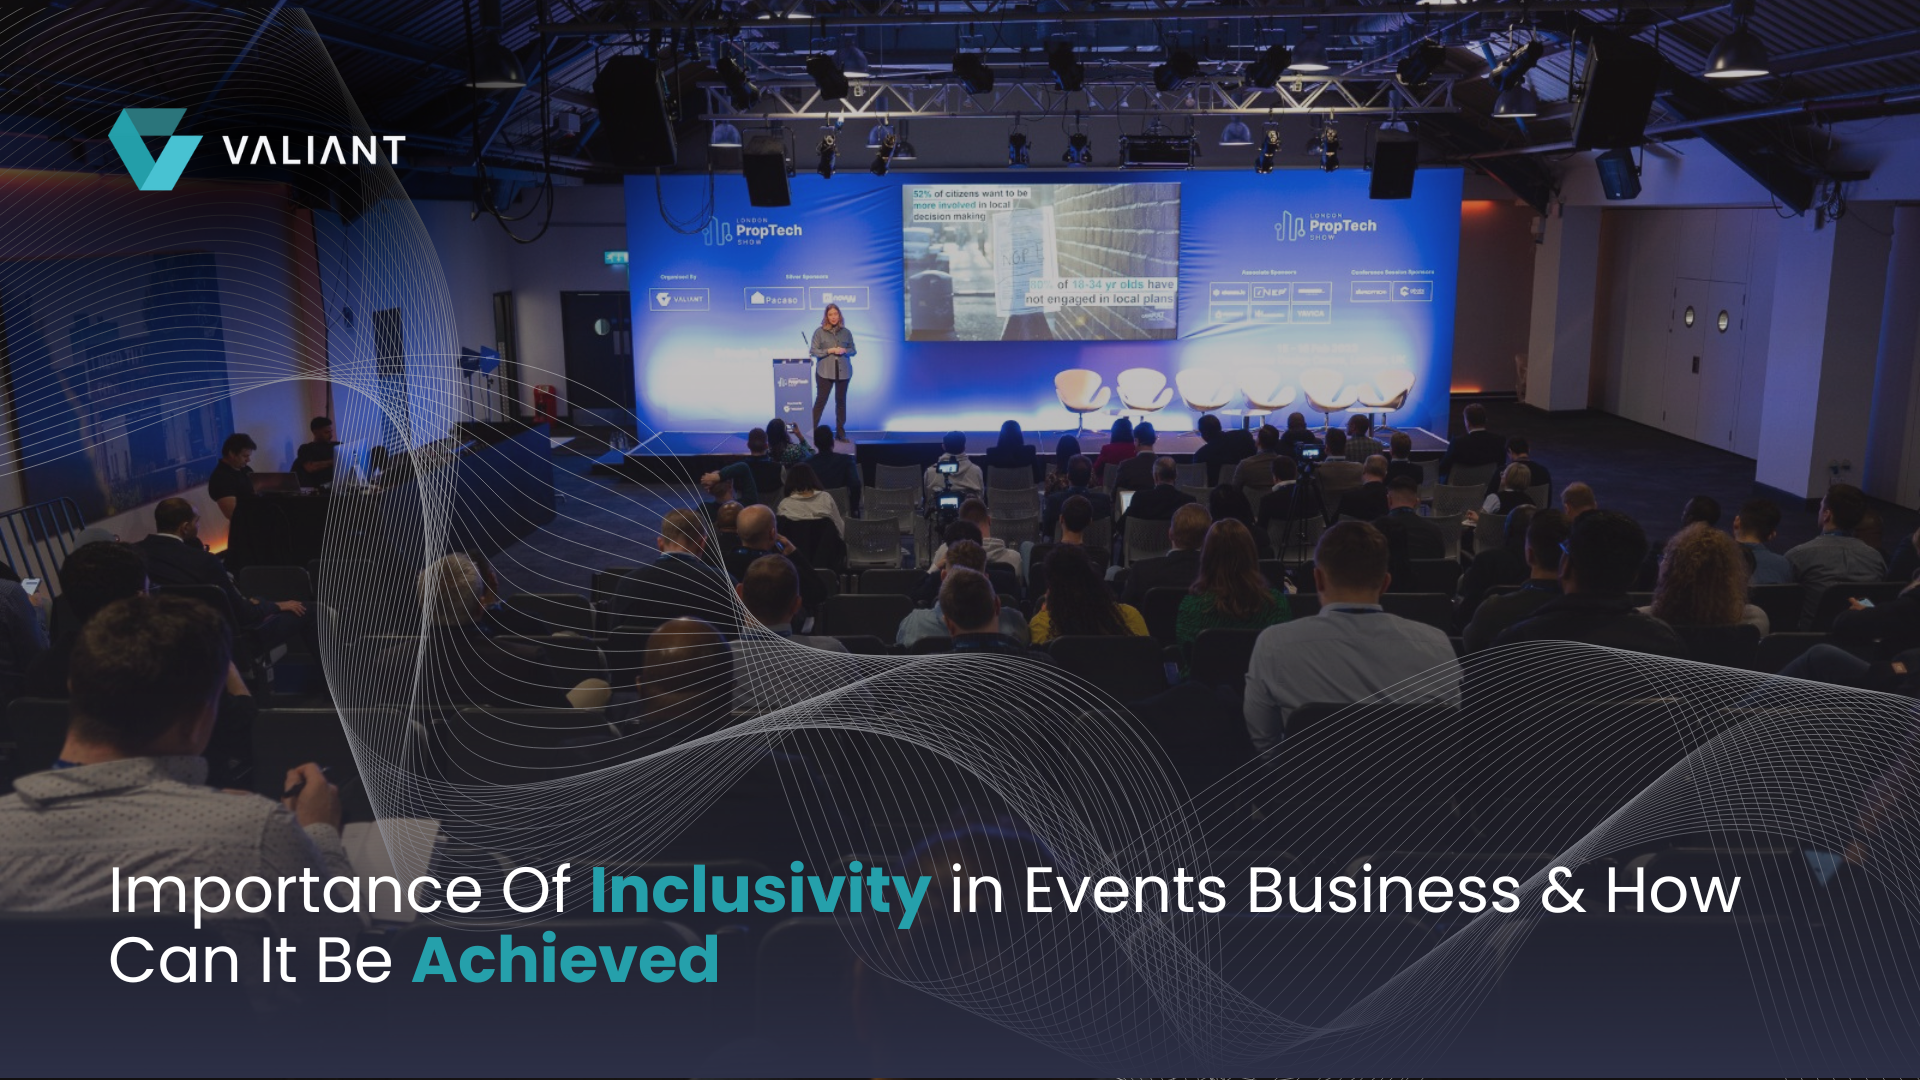 The Importance of Inclusivity in Events Business and How Can It Be Achieved